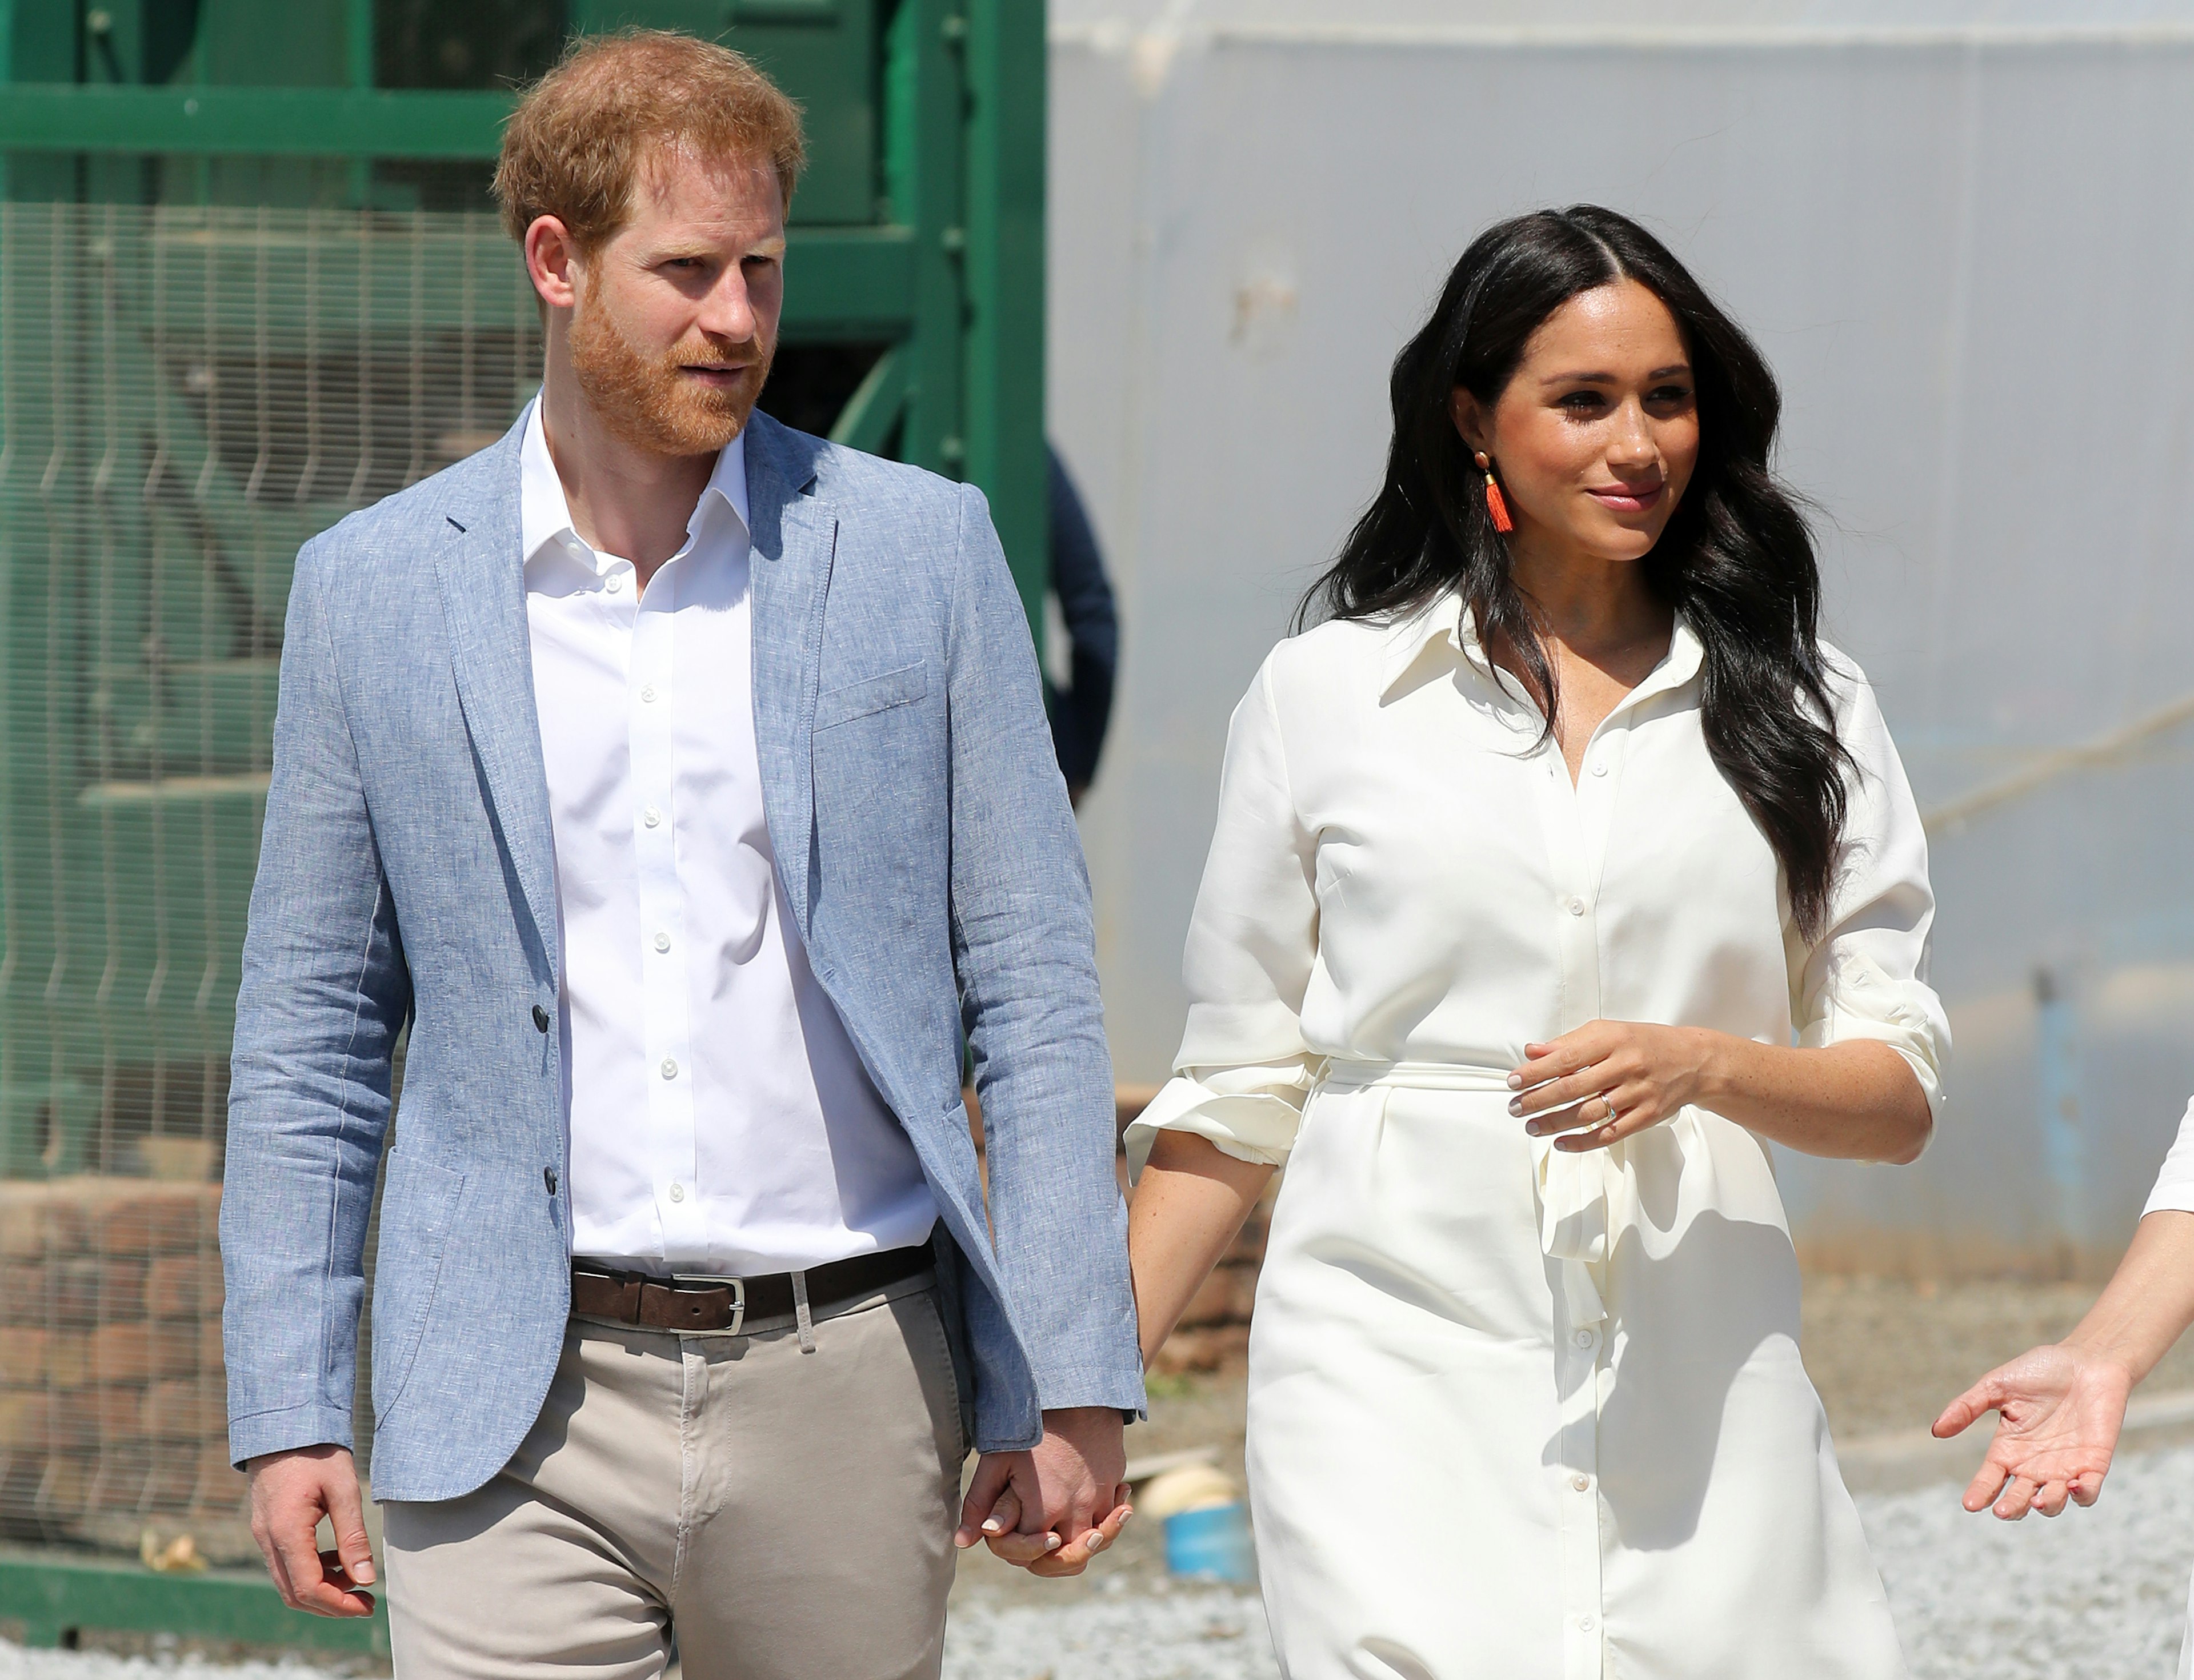 JOHANNESBURG, SOUTH AFRICA - OCTOBER 02: Prince Harry, Duke of Sussex and Meghan, Duchess of Sussex visit a township to learn about Youth Employment Services on October 02, 2019 in Johannesburg, South Africa.  (Photo by Chris Jackson/Getty Images)